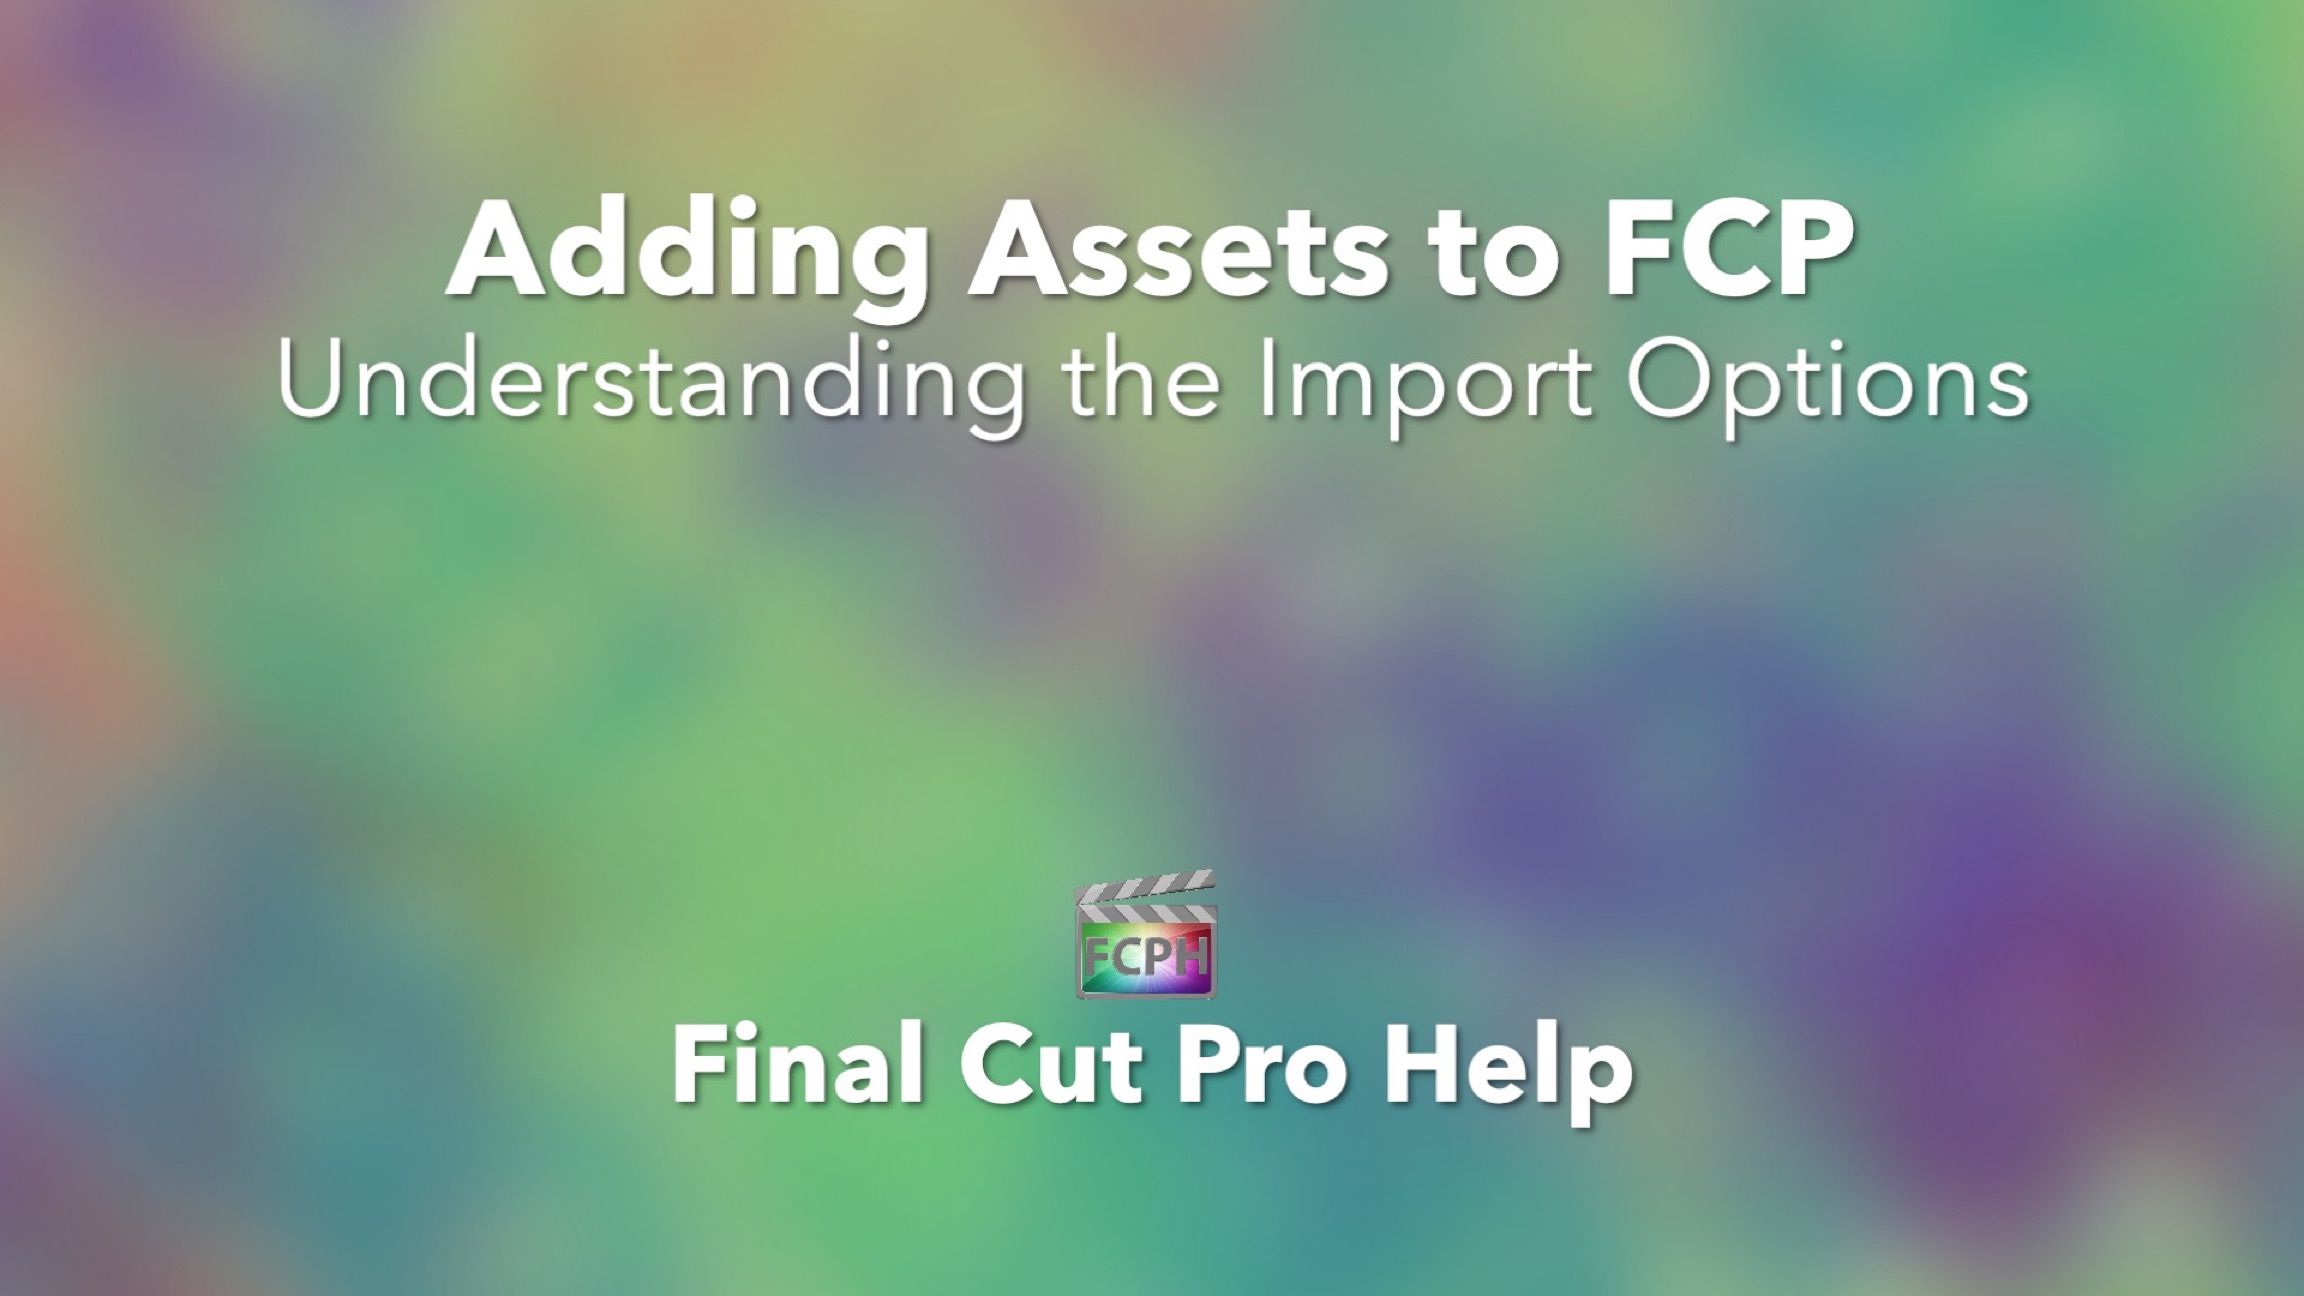 Adding Assets to FCP Understanding the Import Options